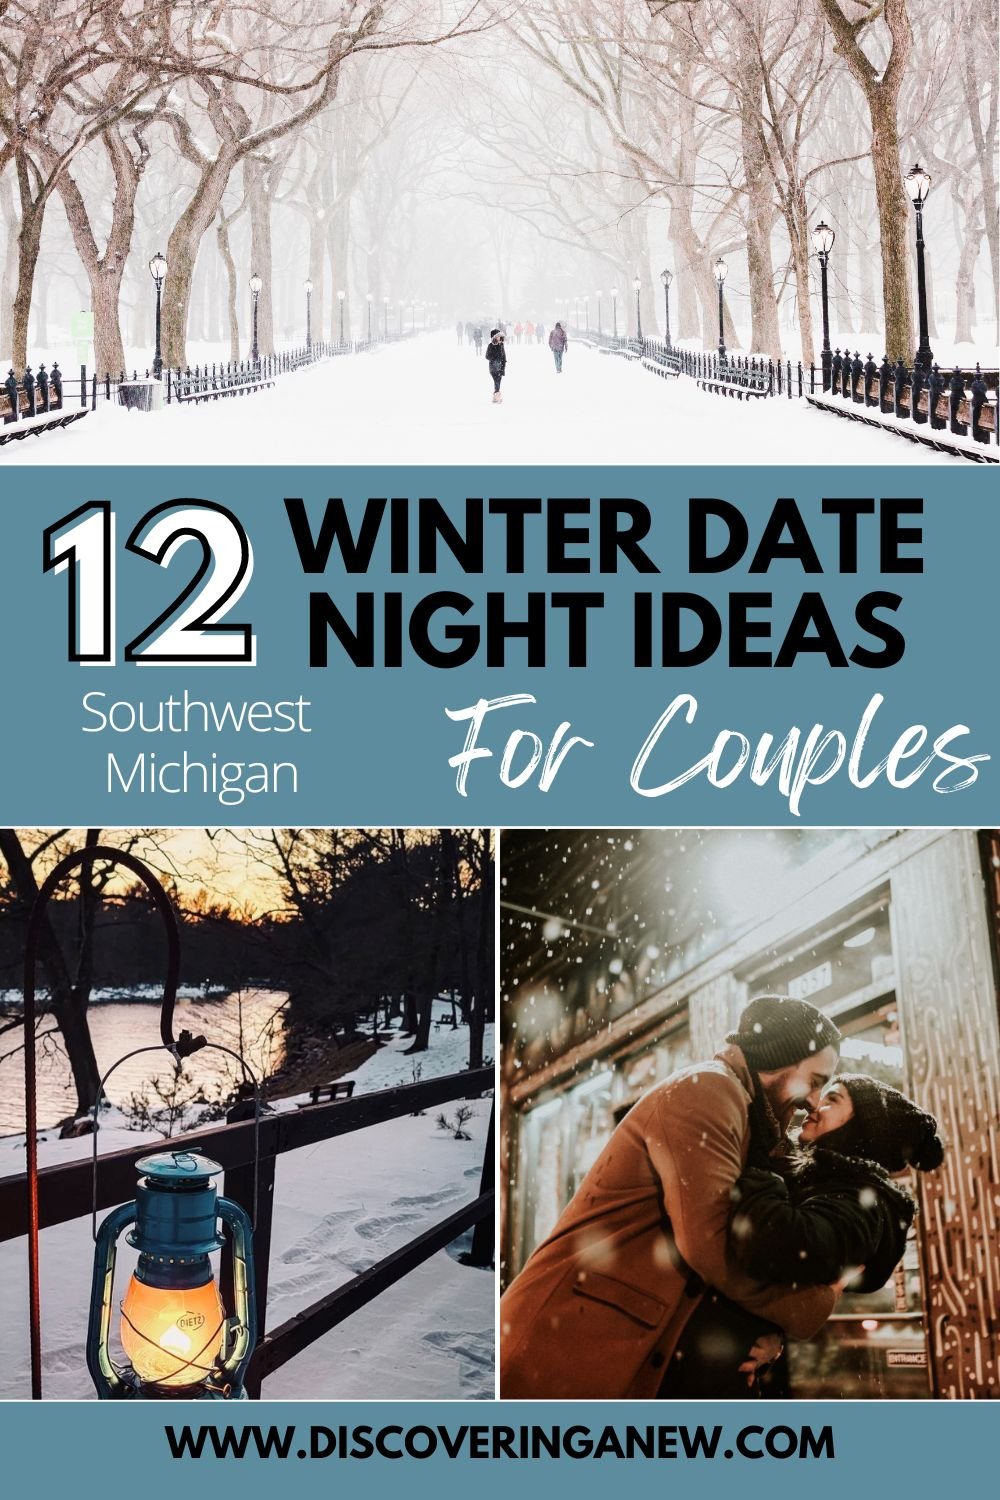 Unique Winter Date Night Ideas for Couples in Southwest Michigan